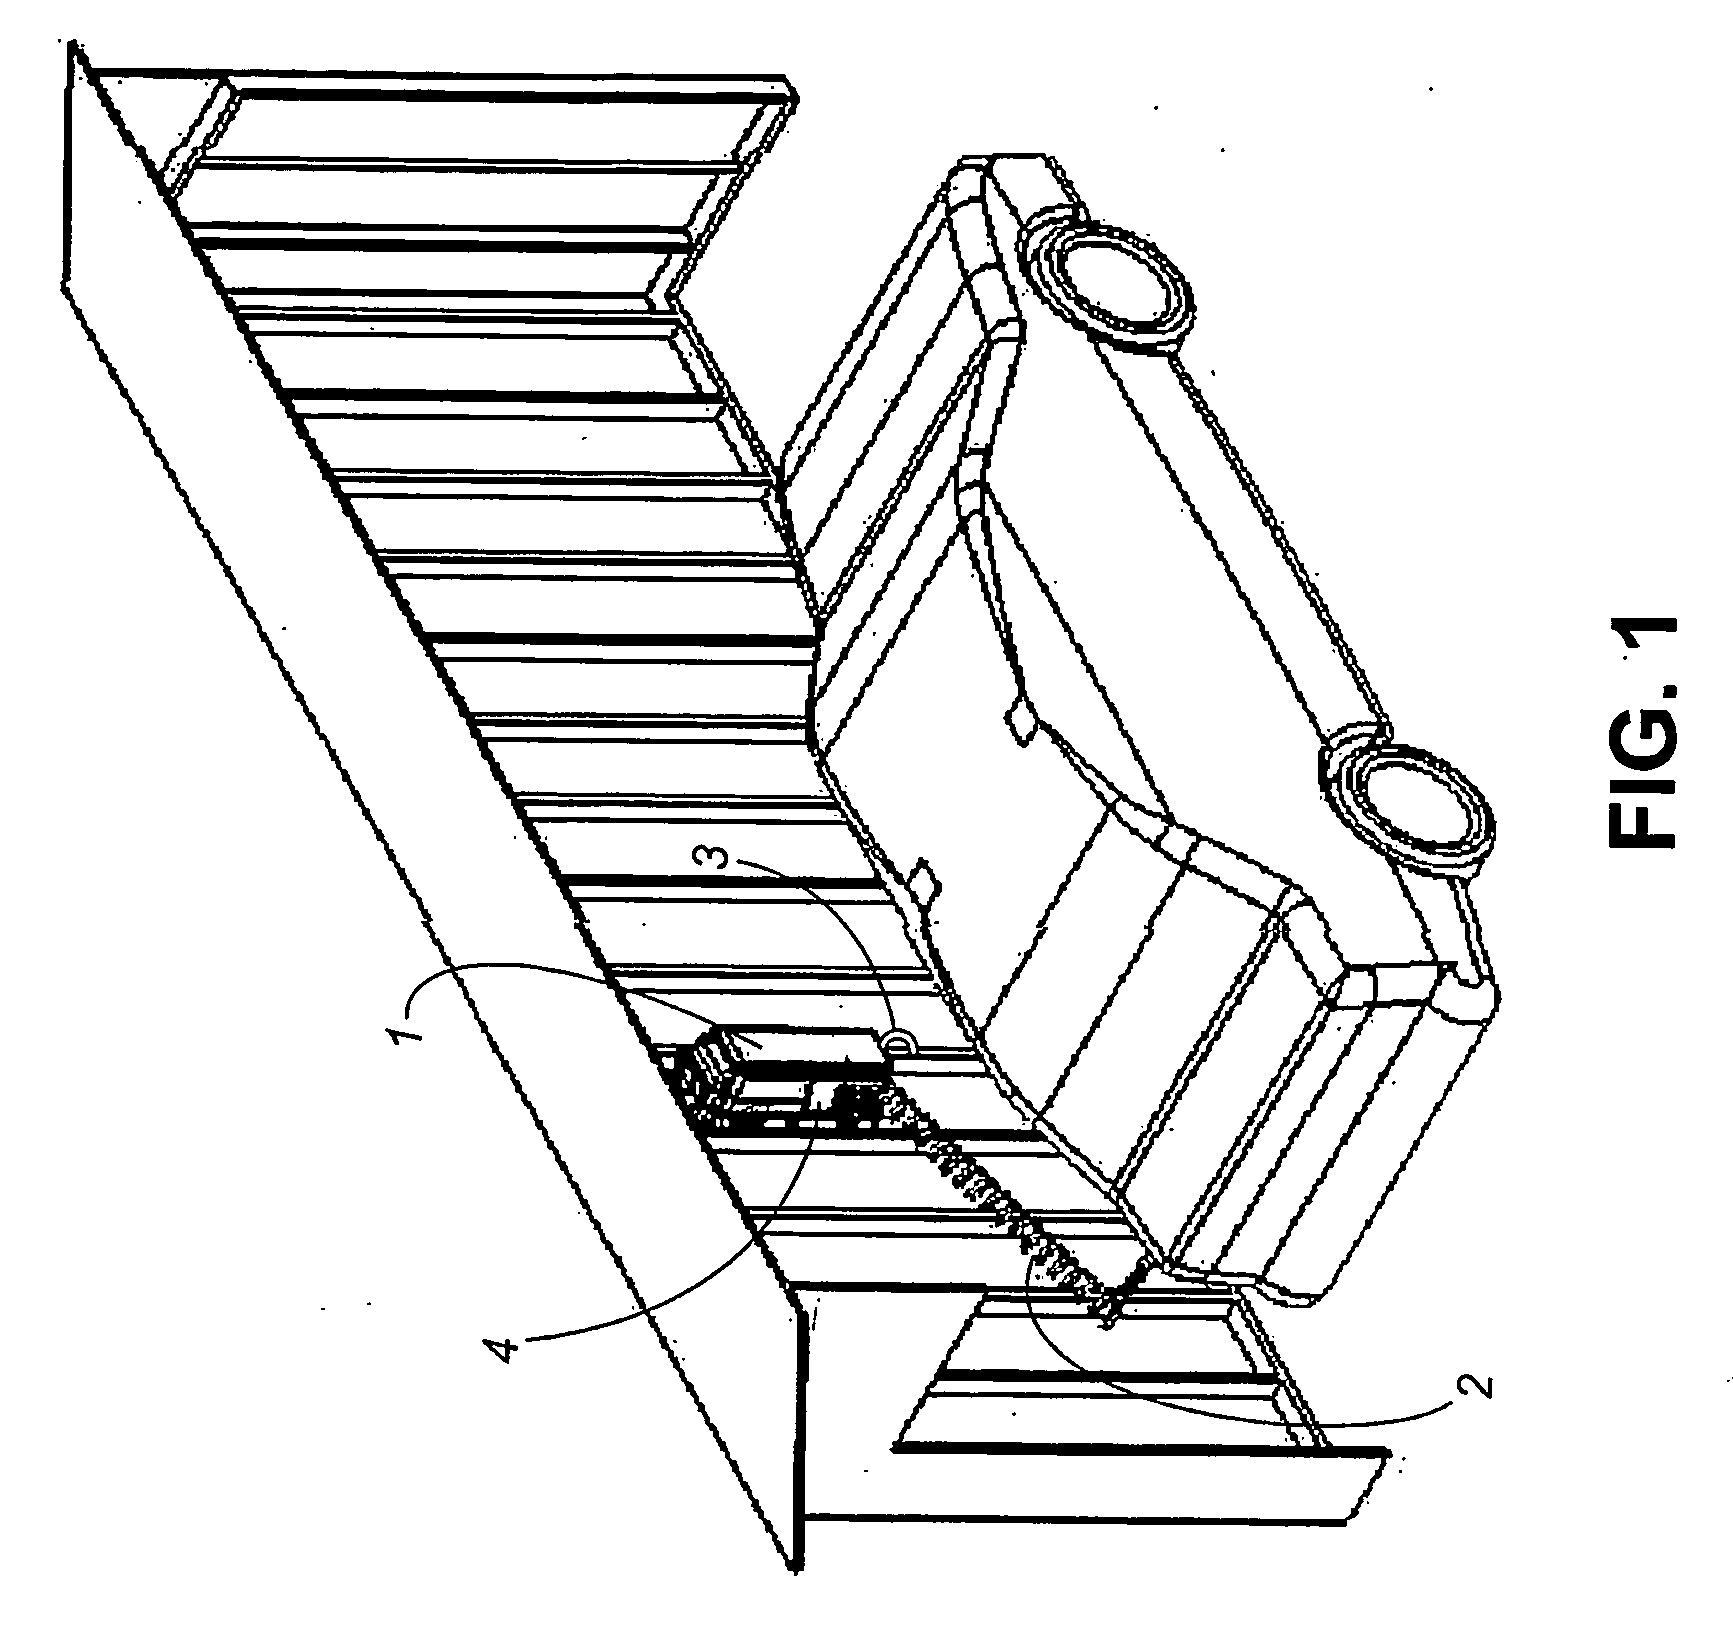 Residential compressor for refueling motor vehicles that operate on gaseous fuels